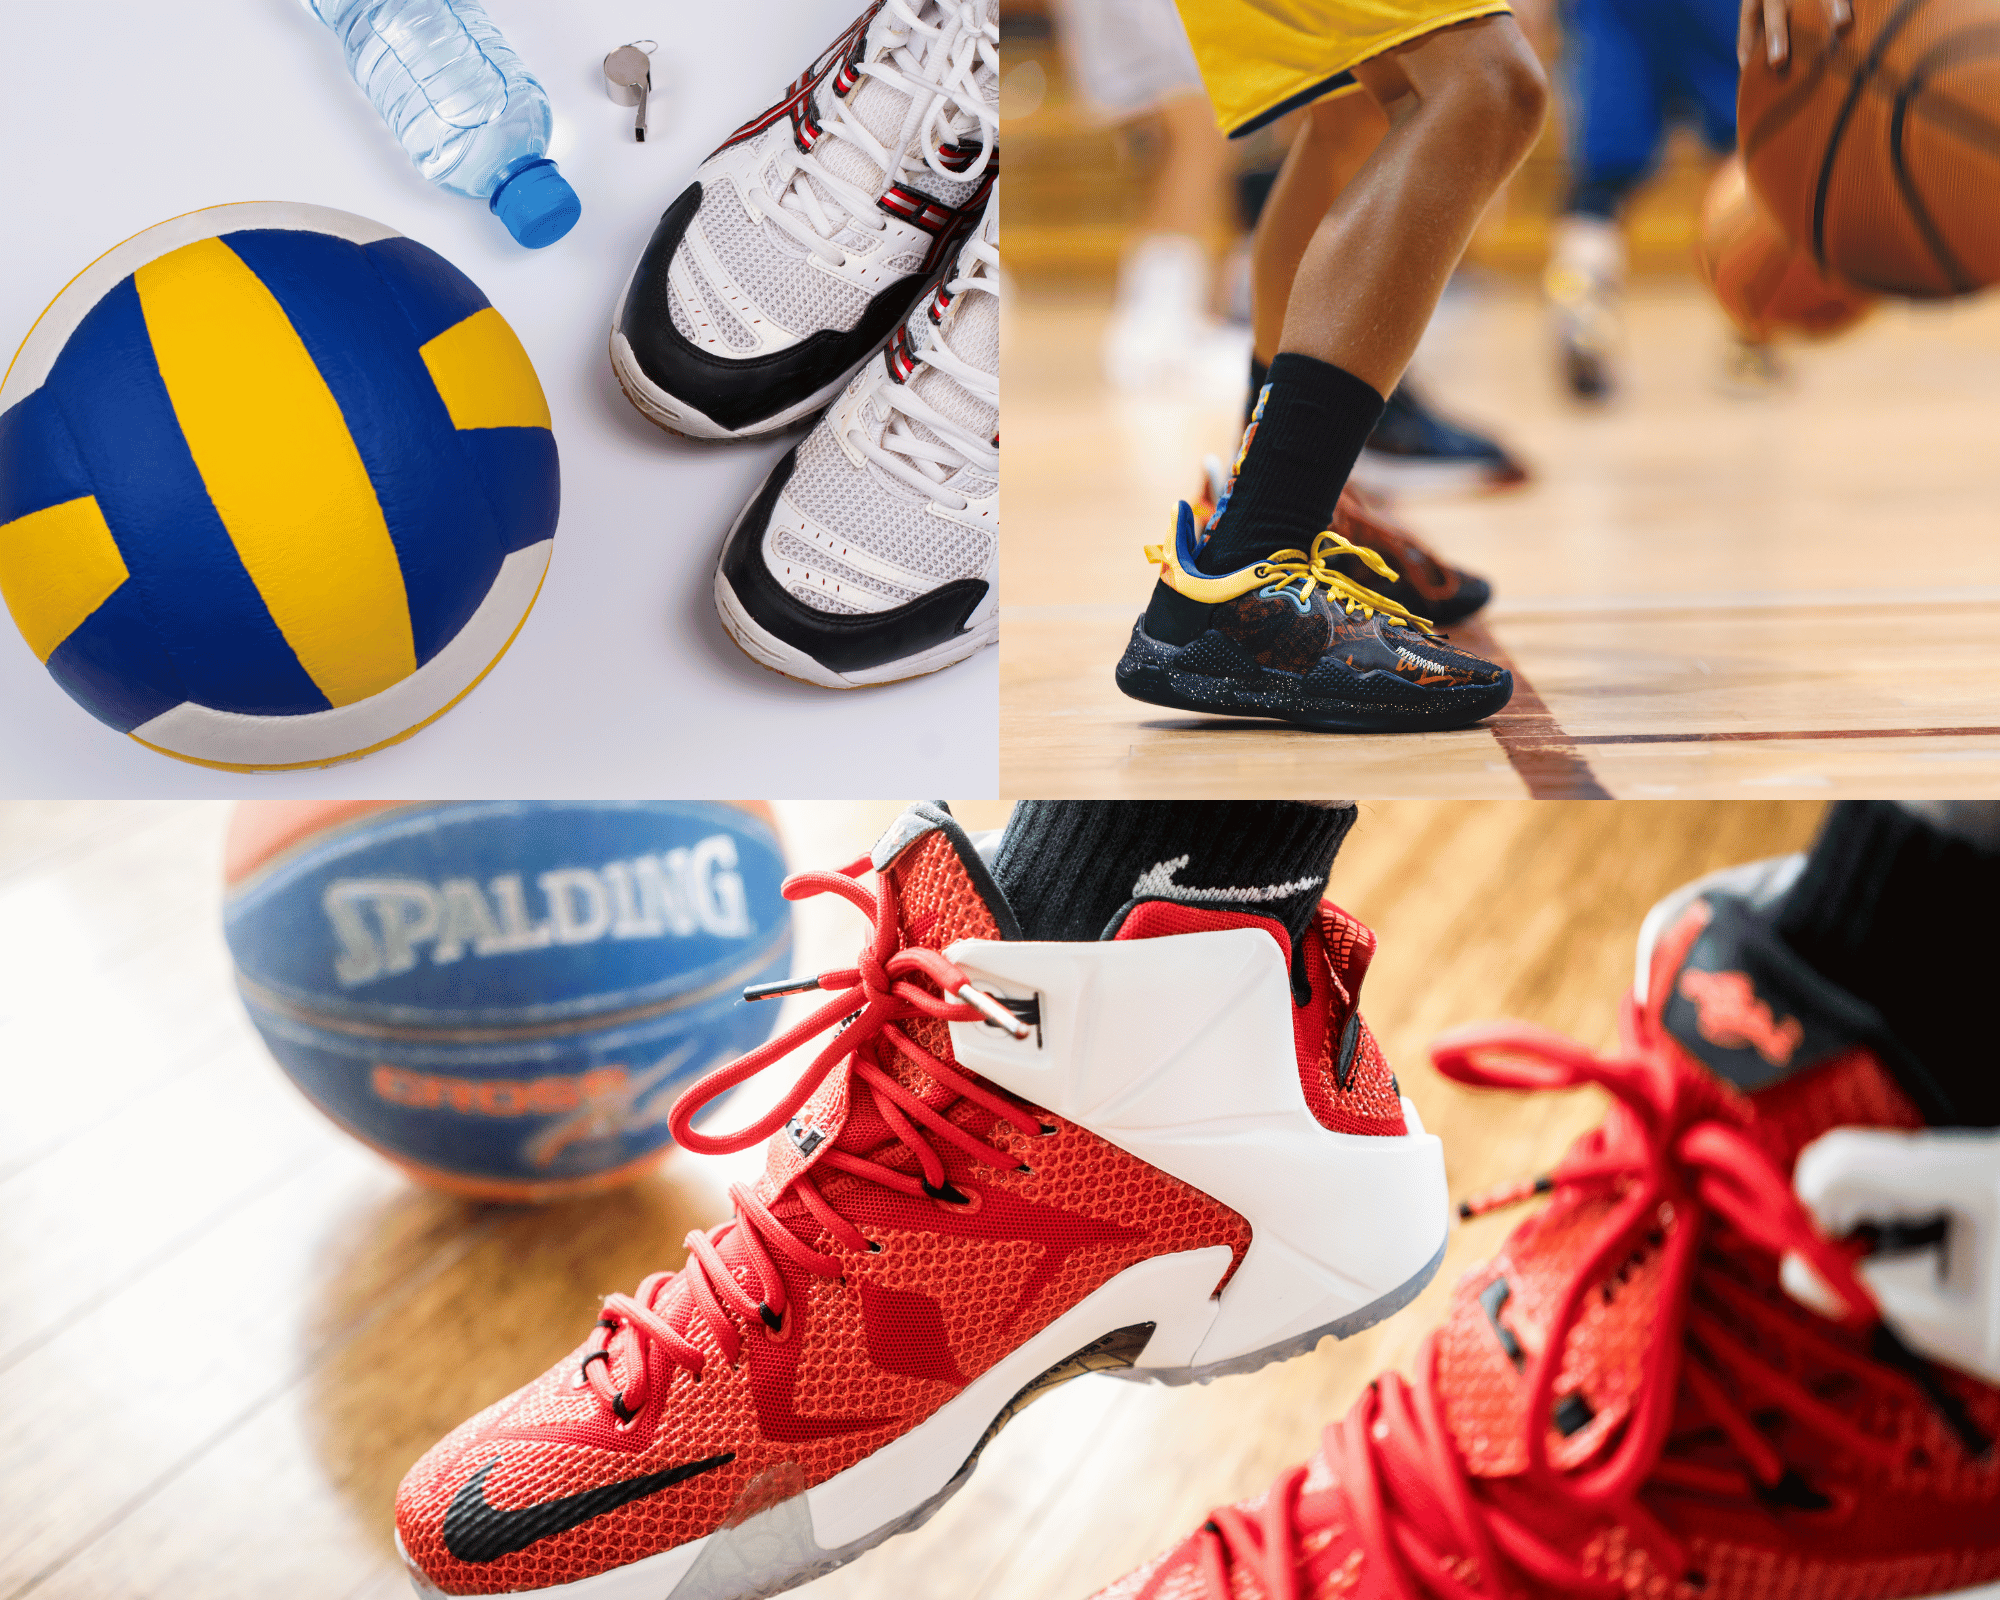 What Basketball Shoes Can Be Used for Volleyball?